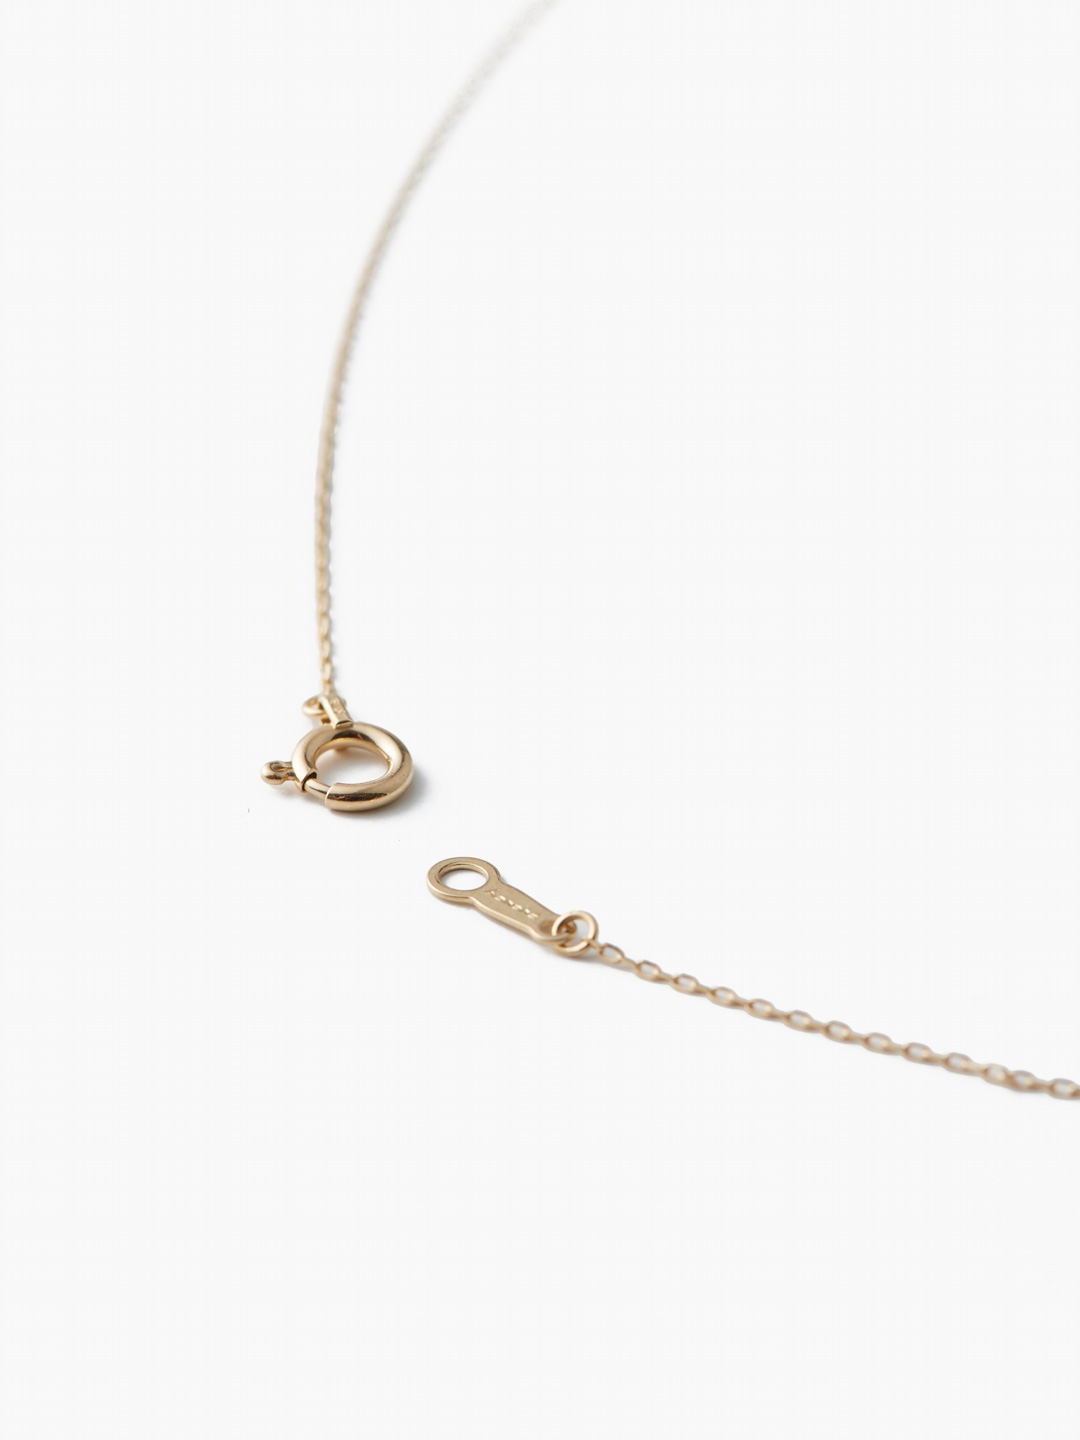 Necklace 赤サンゴ 80cm - Yellow Gold